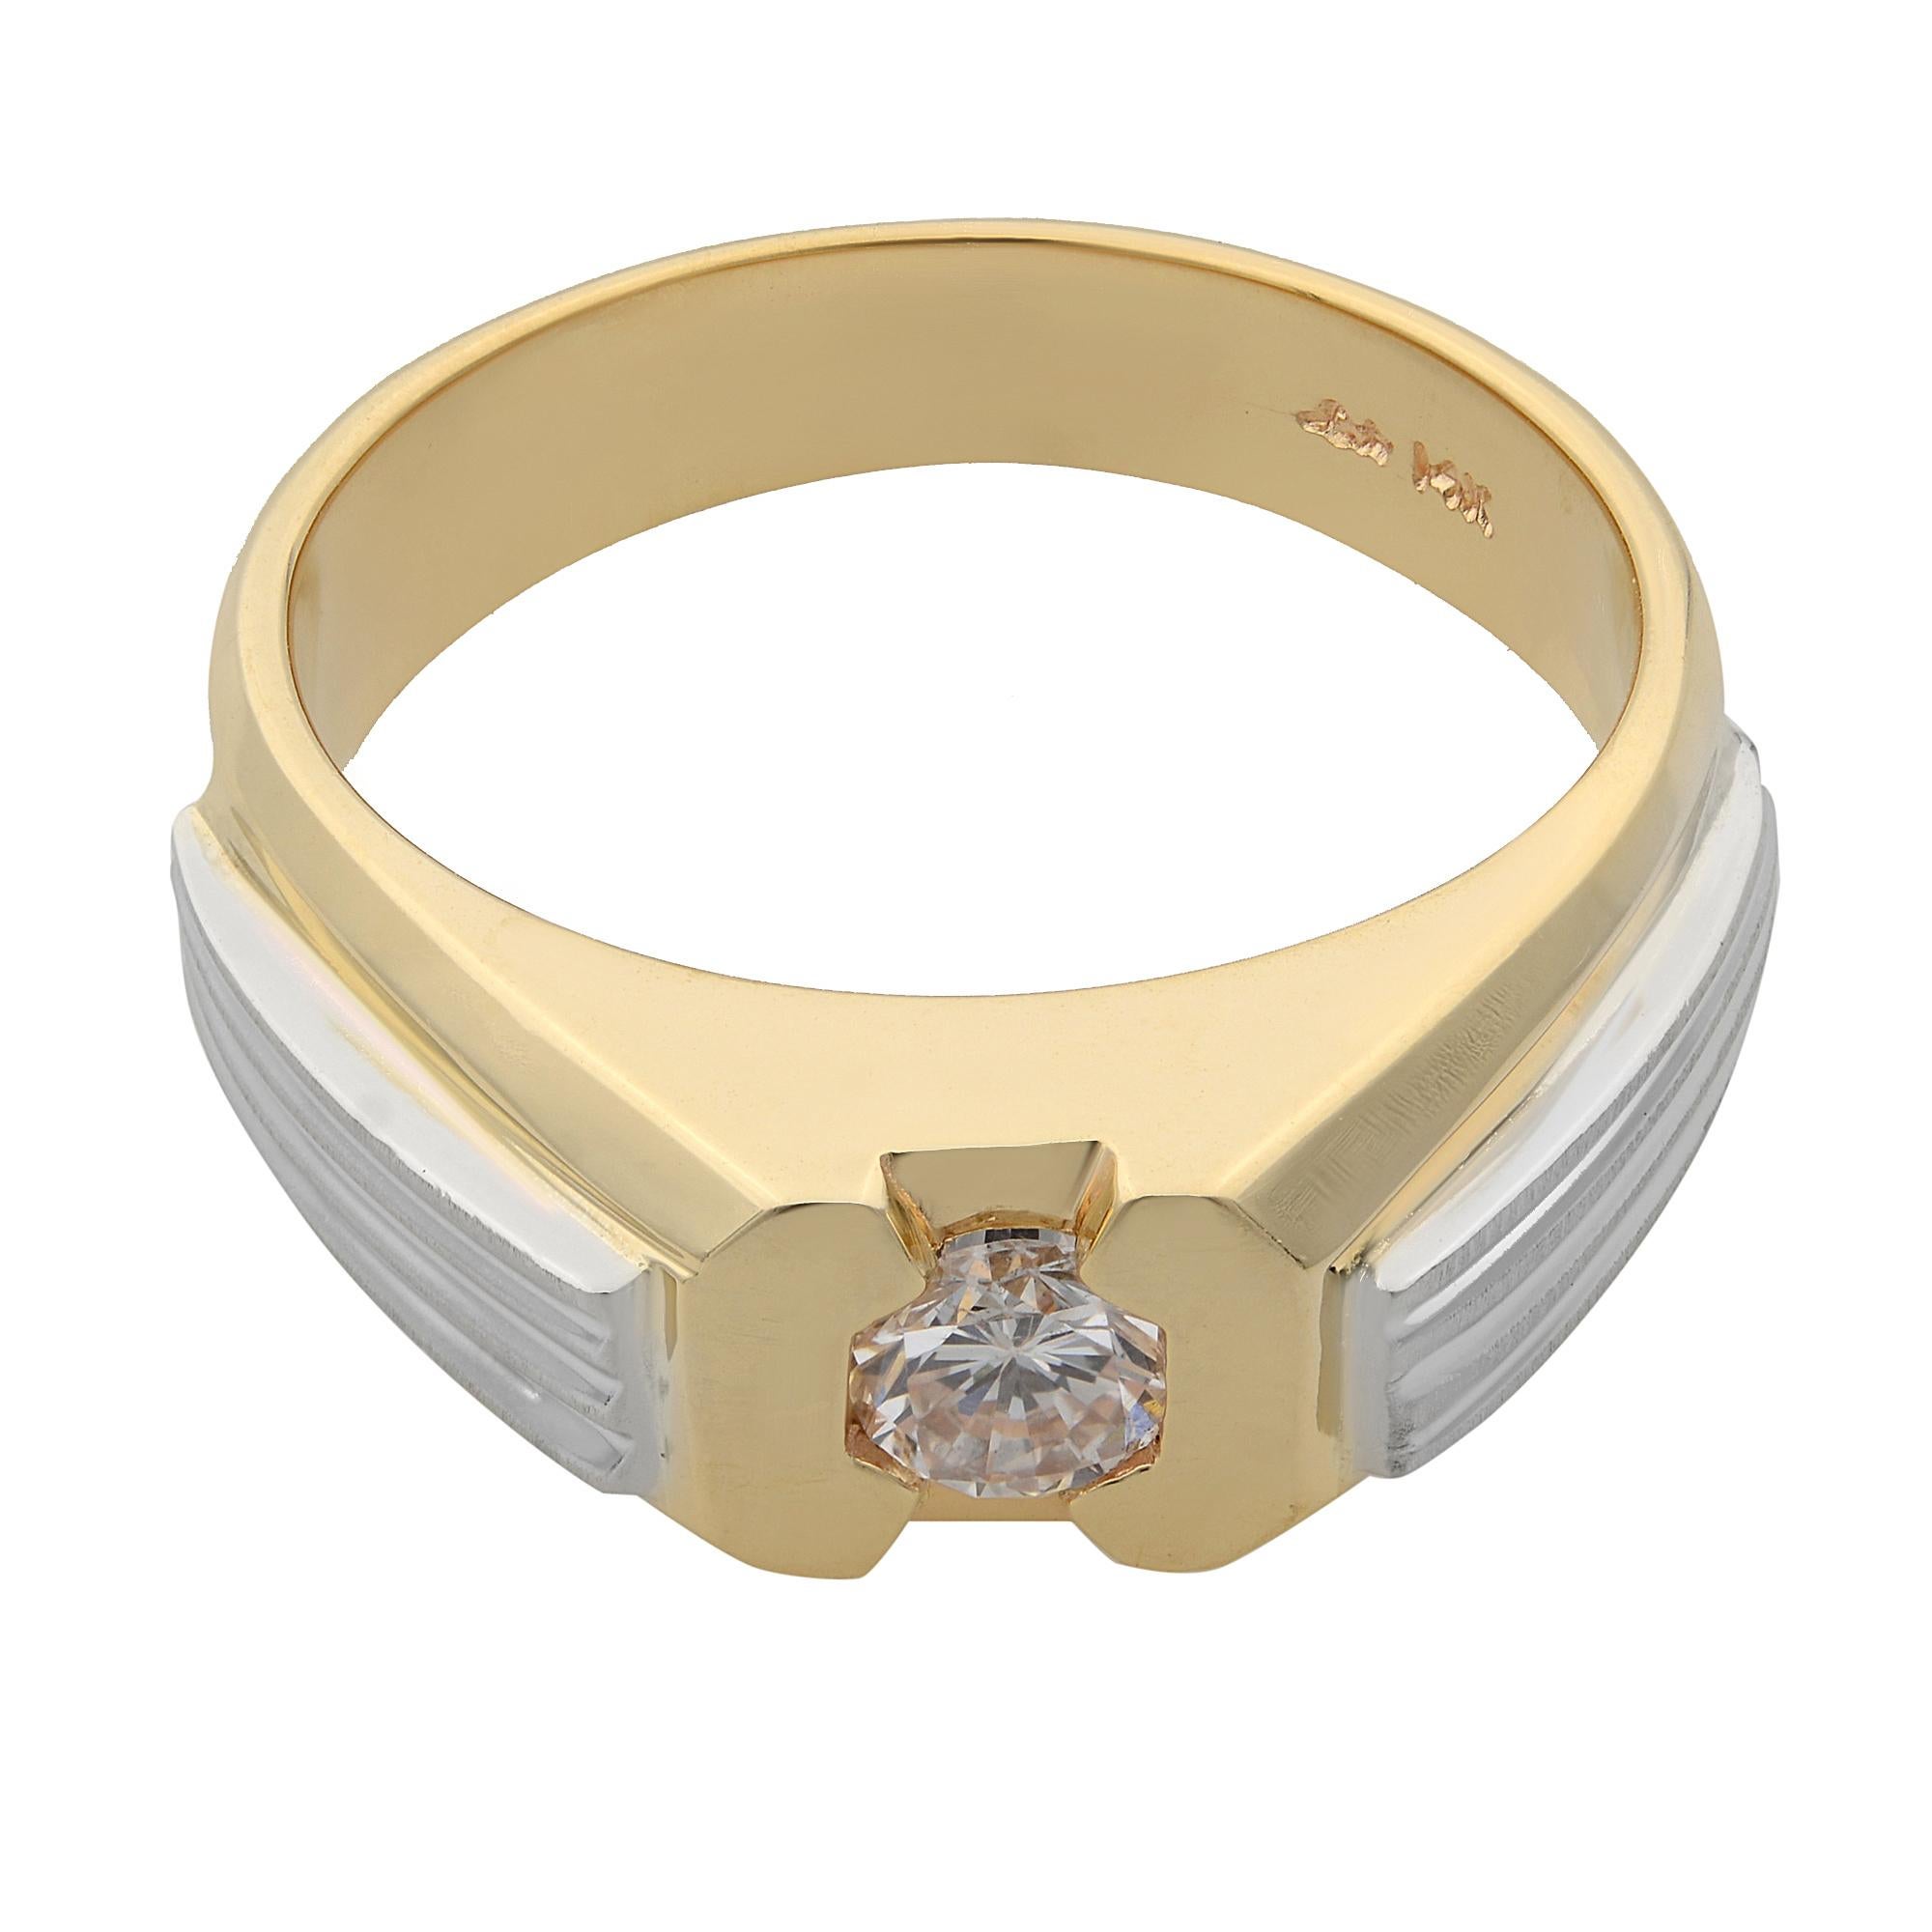 This stunning men's band ring is crafted in 14k yellow with white gold lines on the shoulders. It features a center round brilliant cut diamond weighing 0.50 carat. Diamond quality: color I and clarity SI1. Ring size: 10.5. Band width: 7.4 mm. Total